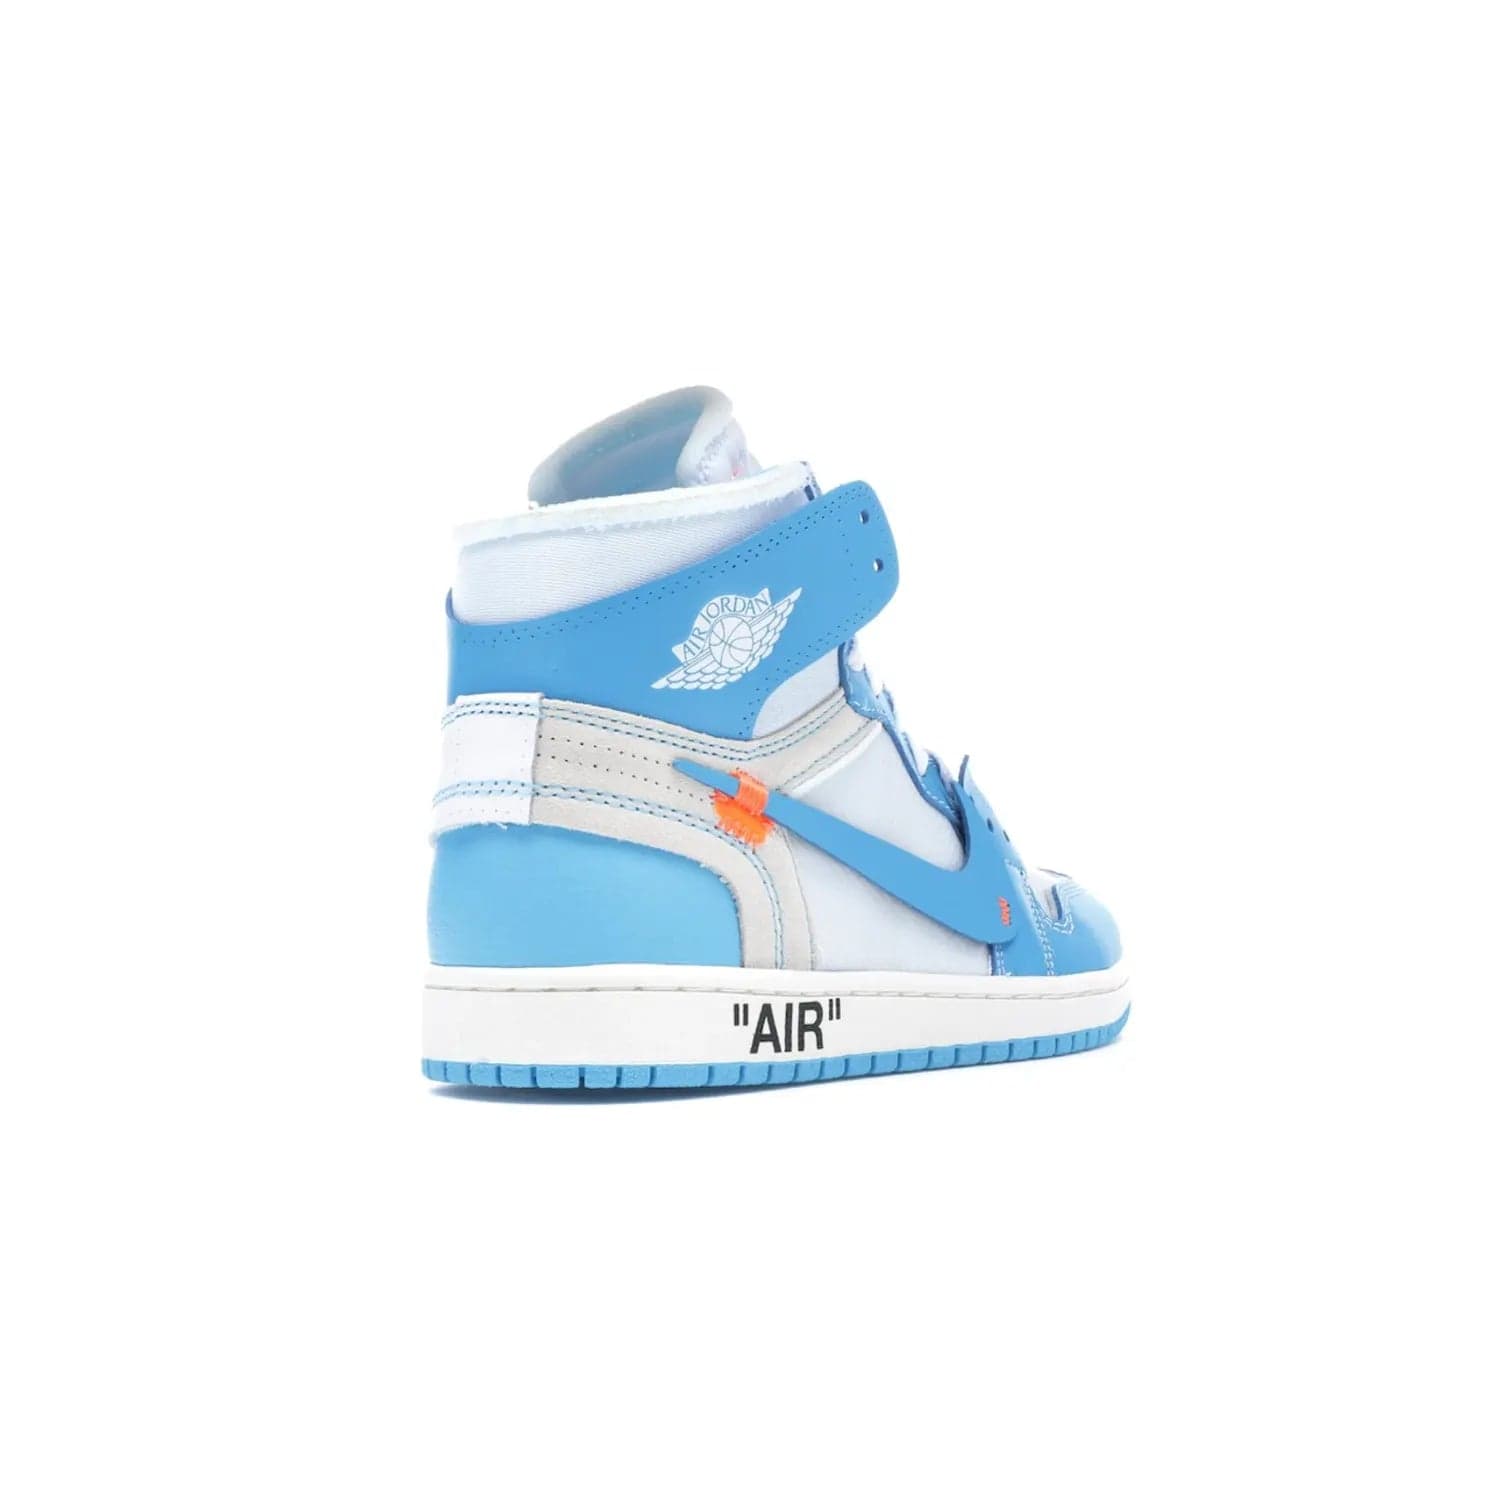 Jordan 1 Retro High Off-White University Blue - Image 32 - Only at www.BallersClubKickz.com - Classic Jordan 1 Retro High "Off-White UNC" sneakers meld style and comfort. Boasting deconstructed white and blue leather, Off-White detailing, and a white, dark powder blue and cone colorway, these sneakers are perfect for dressing up or down. Get the iconic Off-White Jordan 1's and upgrade your look.